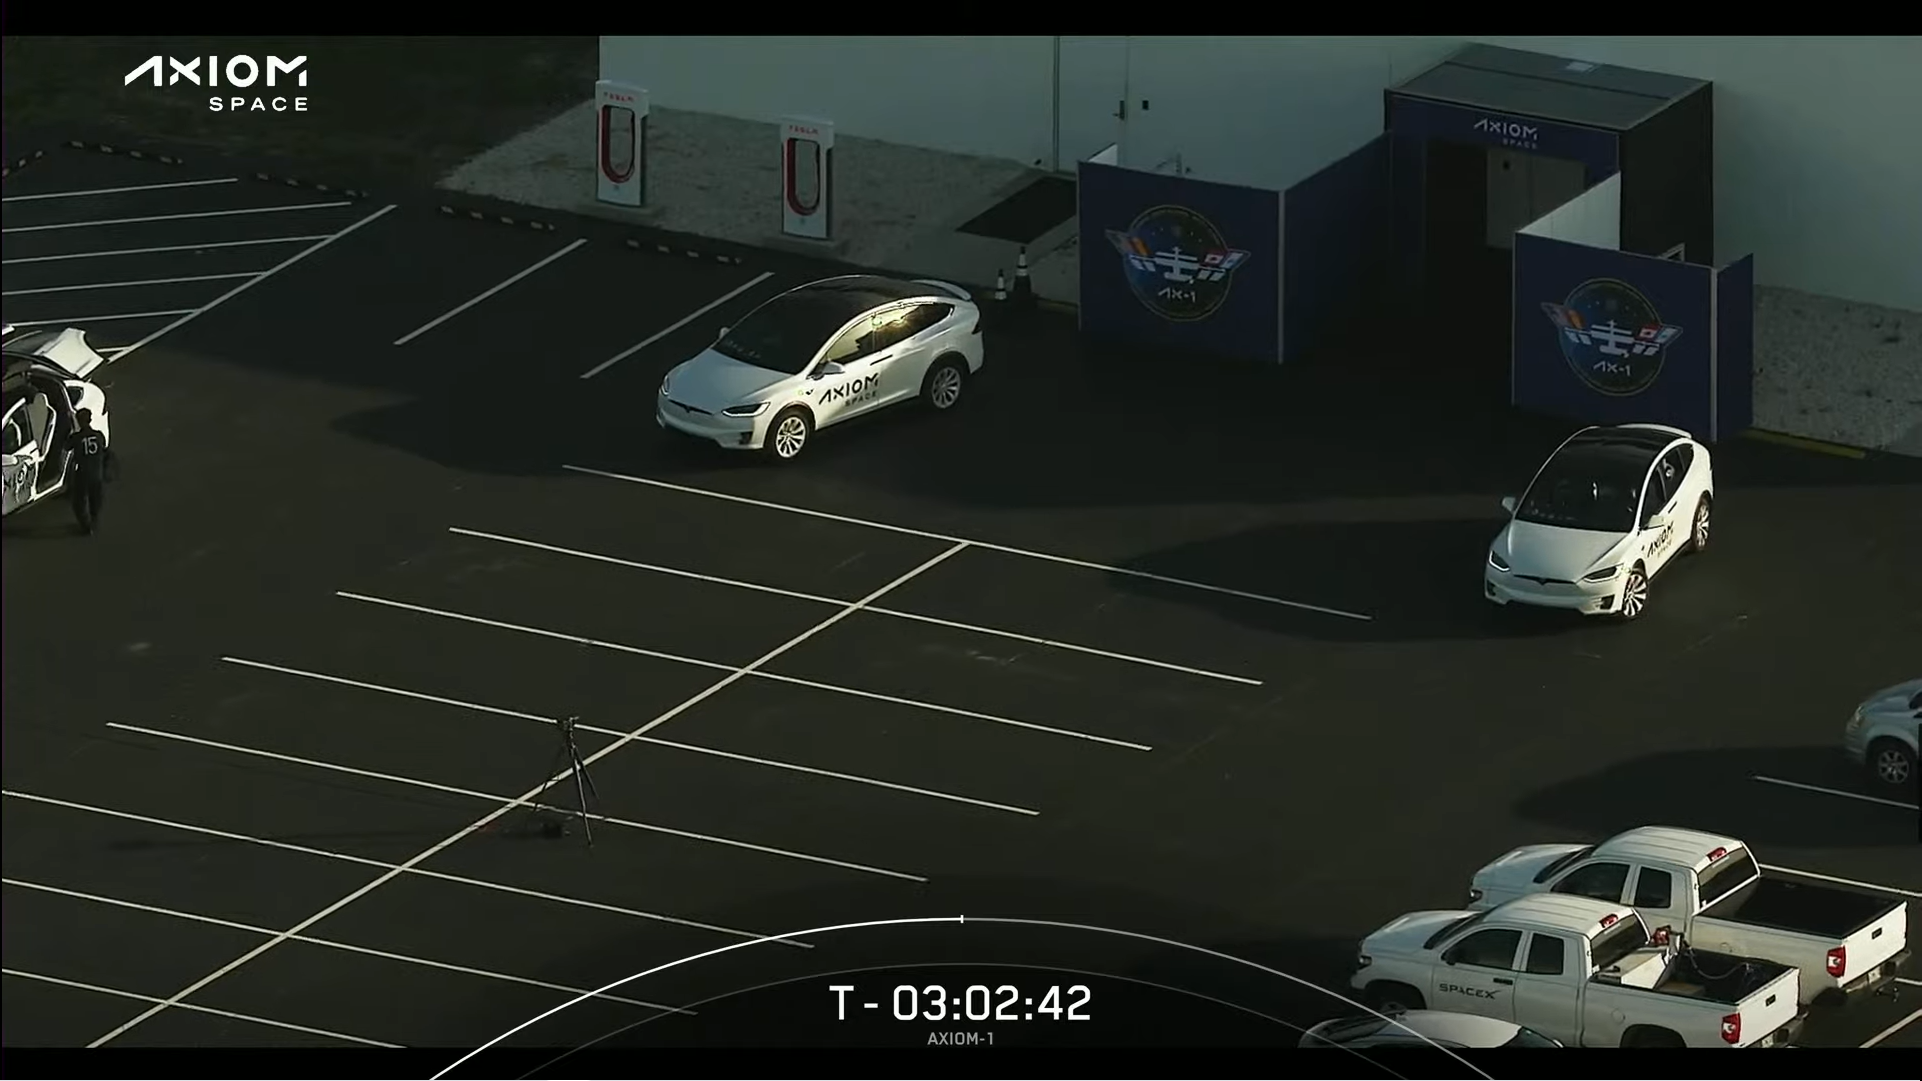 The astronauts of Ax-1 boarded two customized Teslas for the short drive to the launch pad.